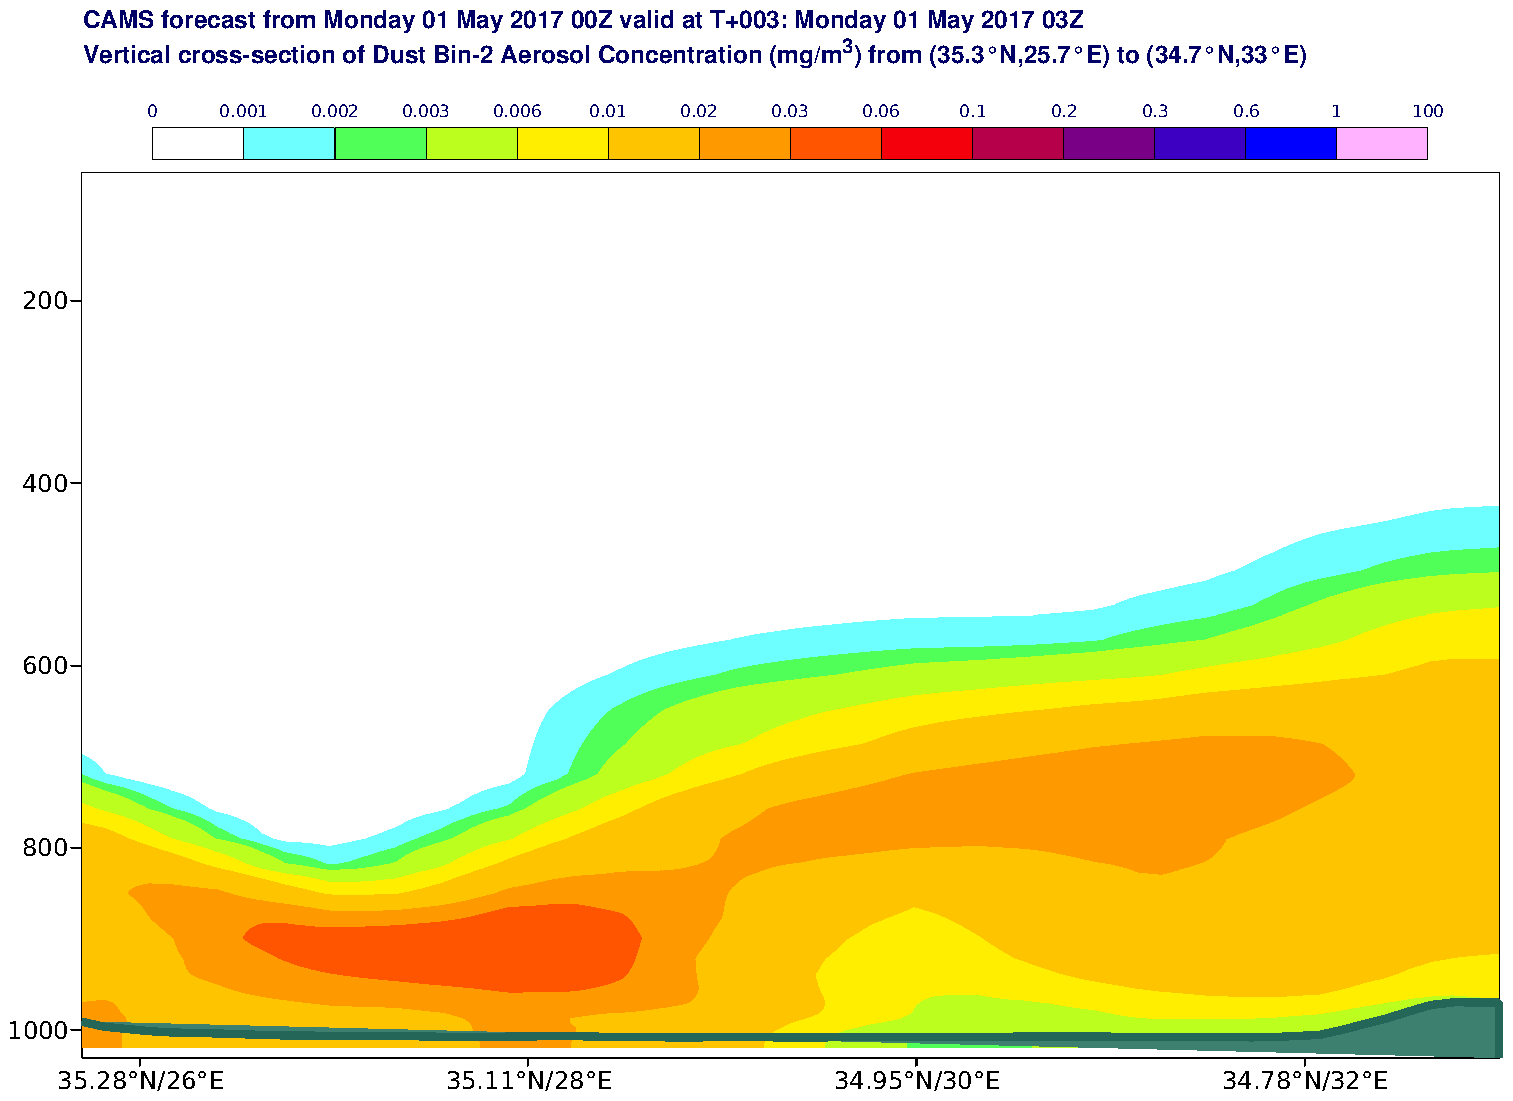 Vertical cross-section of Dust Bin-2 Aerosol Concentration (mg/m3) valid at T3 - 2017-05-01 03:00